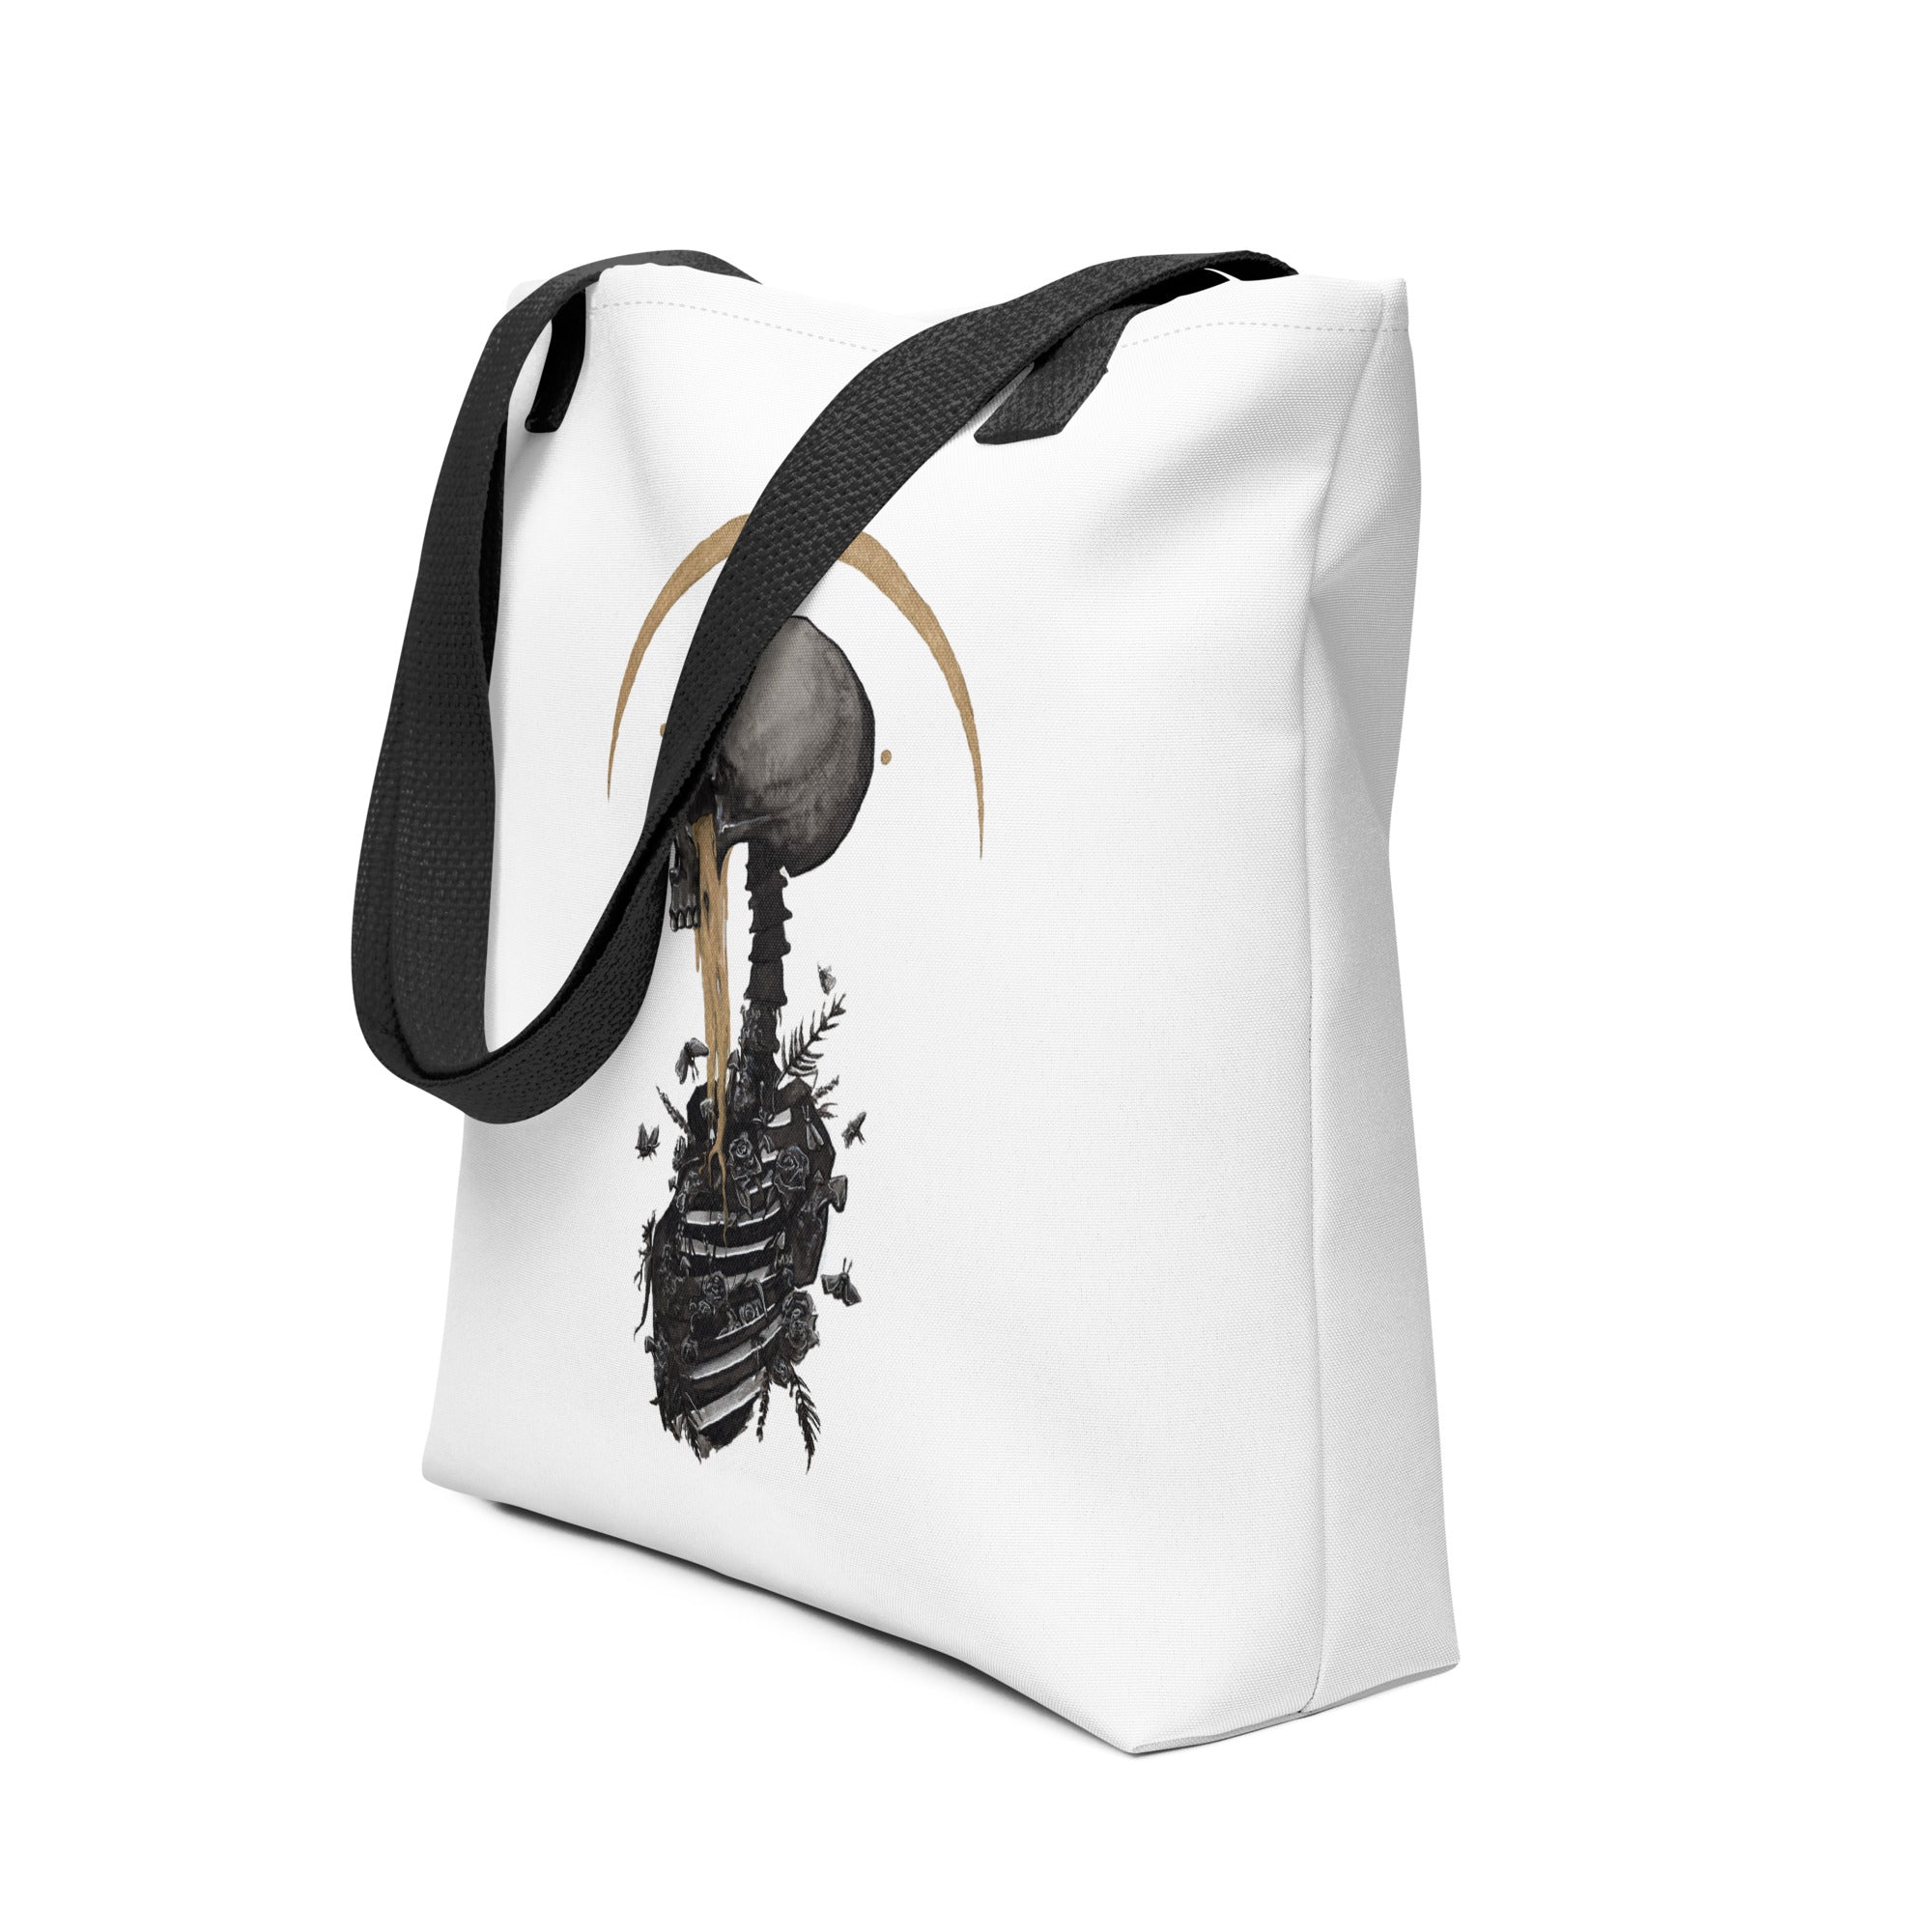 The Giver Tote Bag